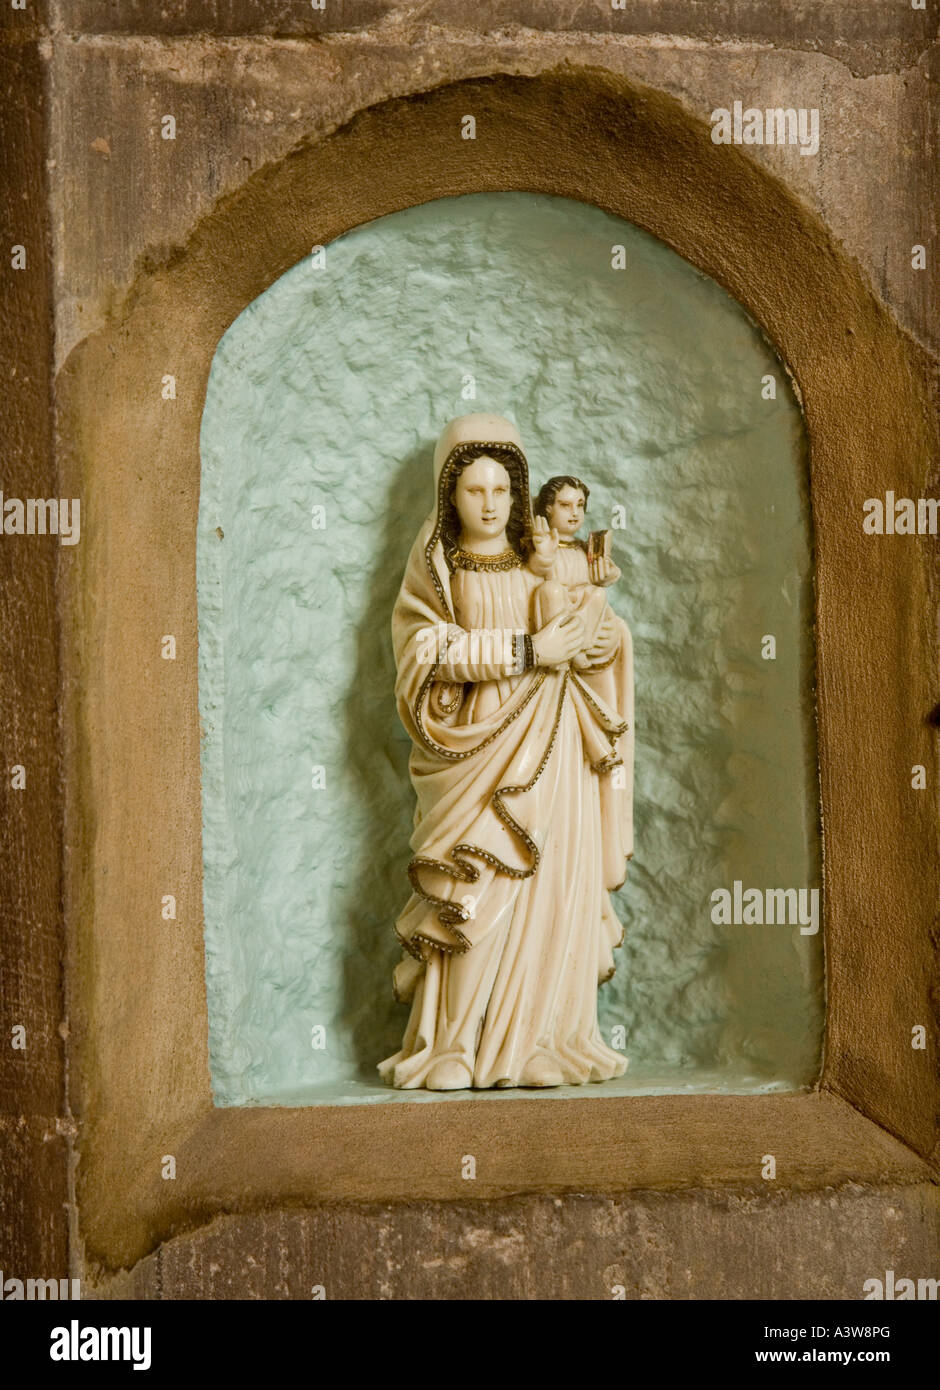 The statue of the Spanish Madonna in St Asaph Cathedral St Asaph Denbighshire Wales UK Stock Photo